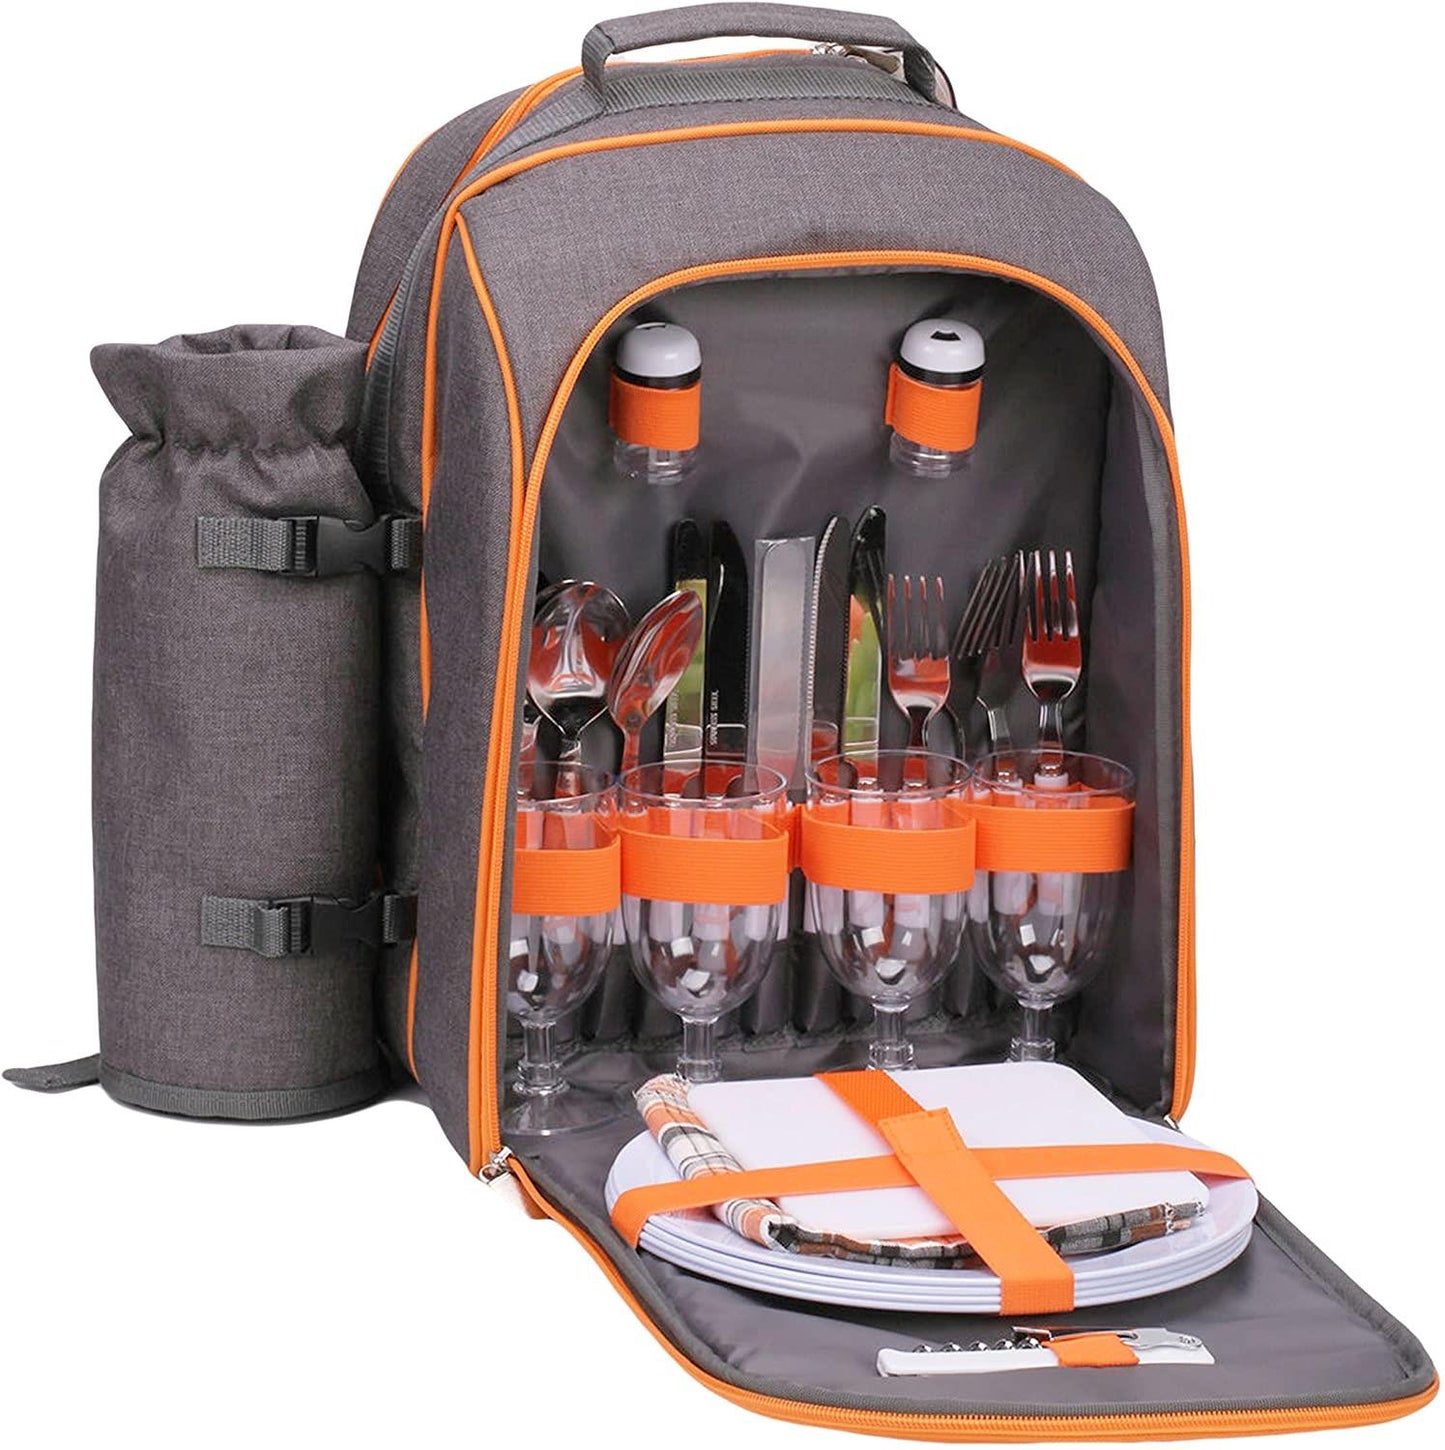 4 Person Picnic Cooler Bag With Picnic Essentials by Geezy - UKBuyZone